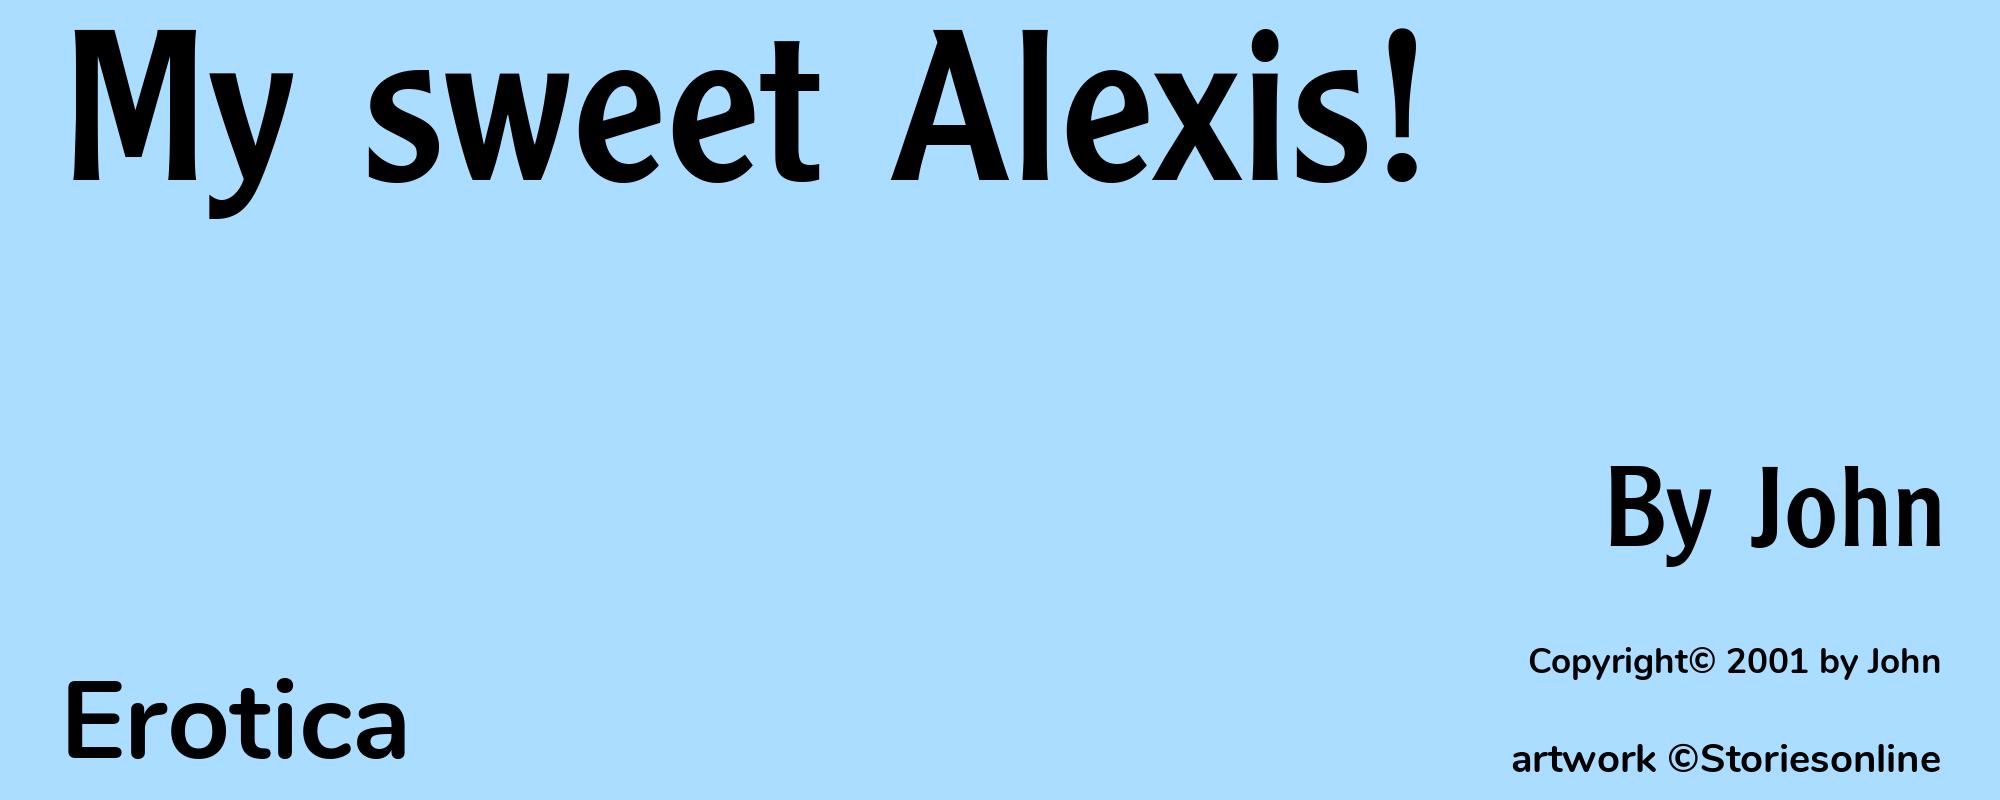 My sweet Alexis! - Cover